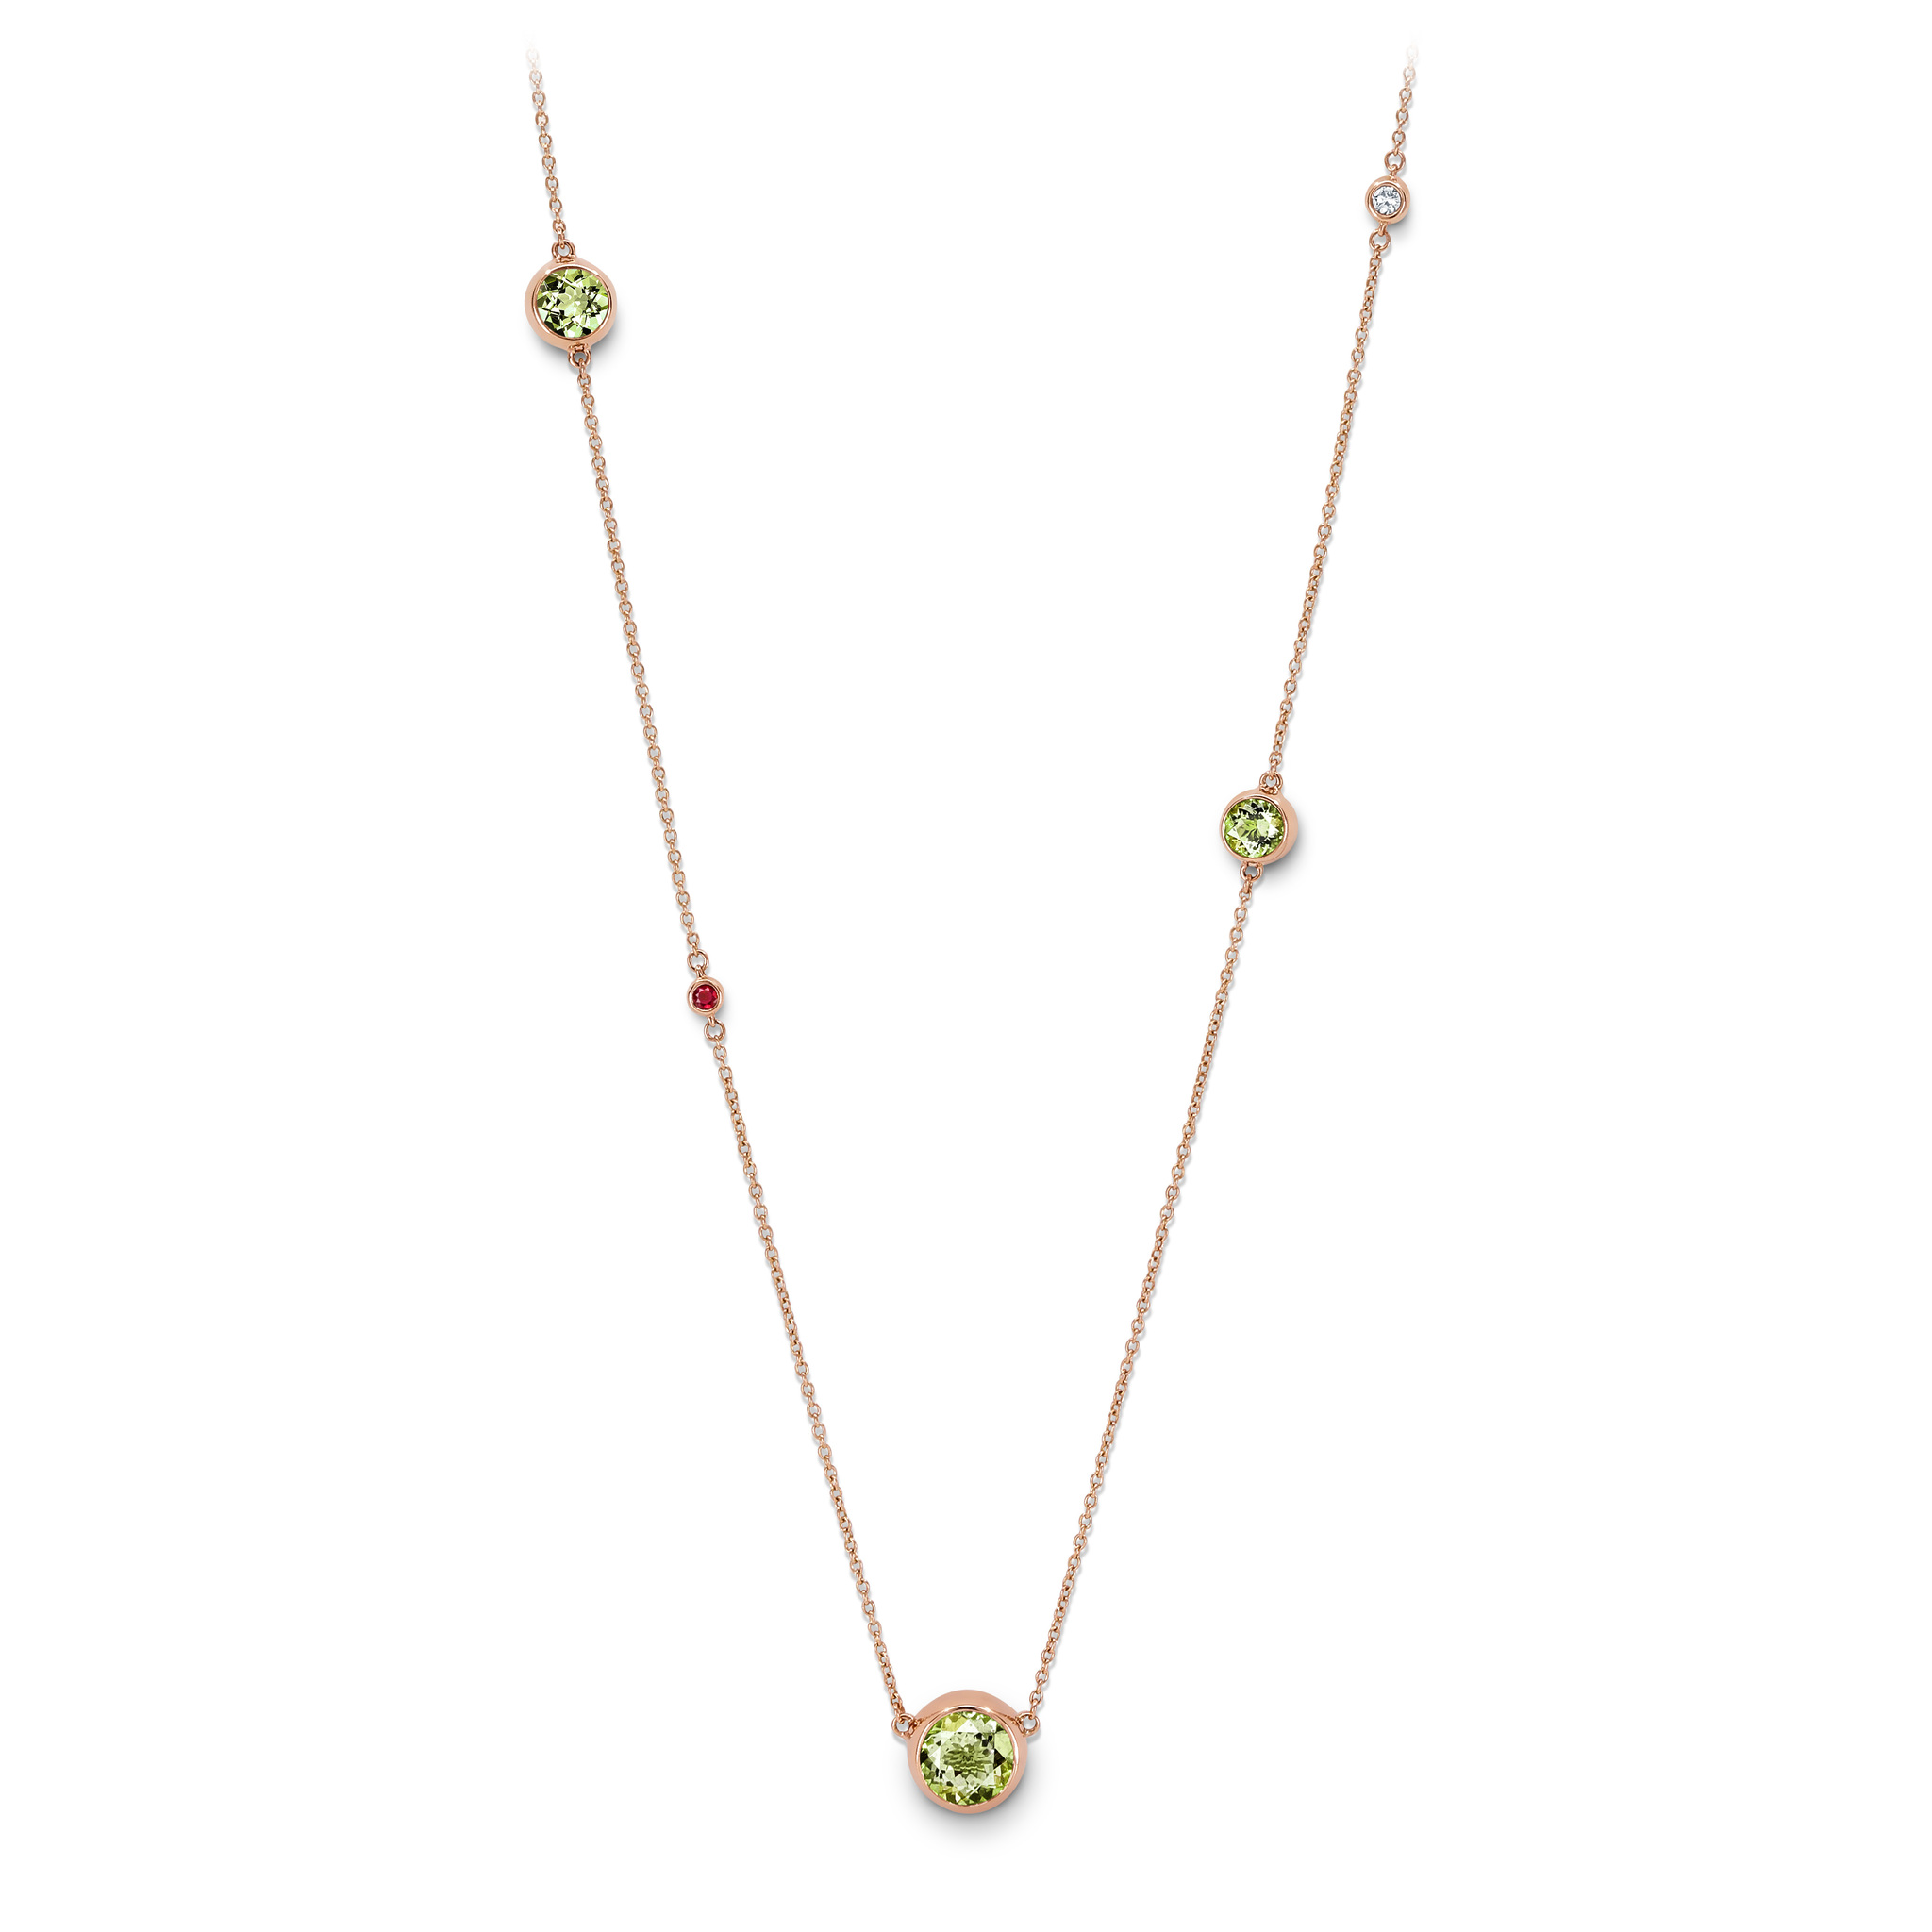 Necklace with tourmalines